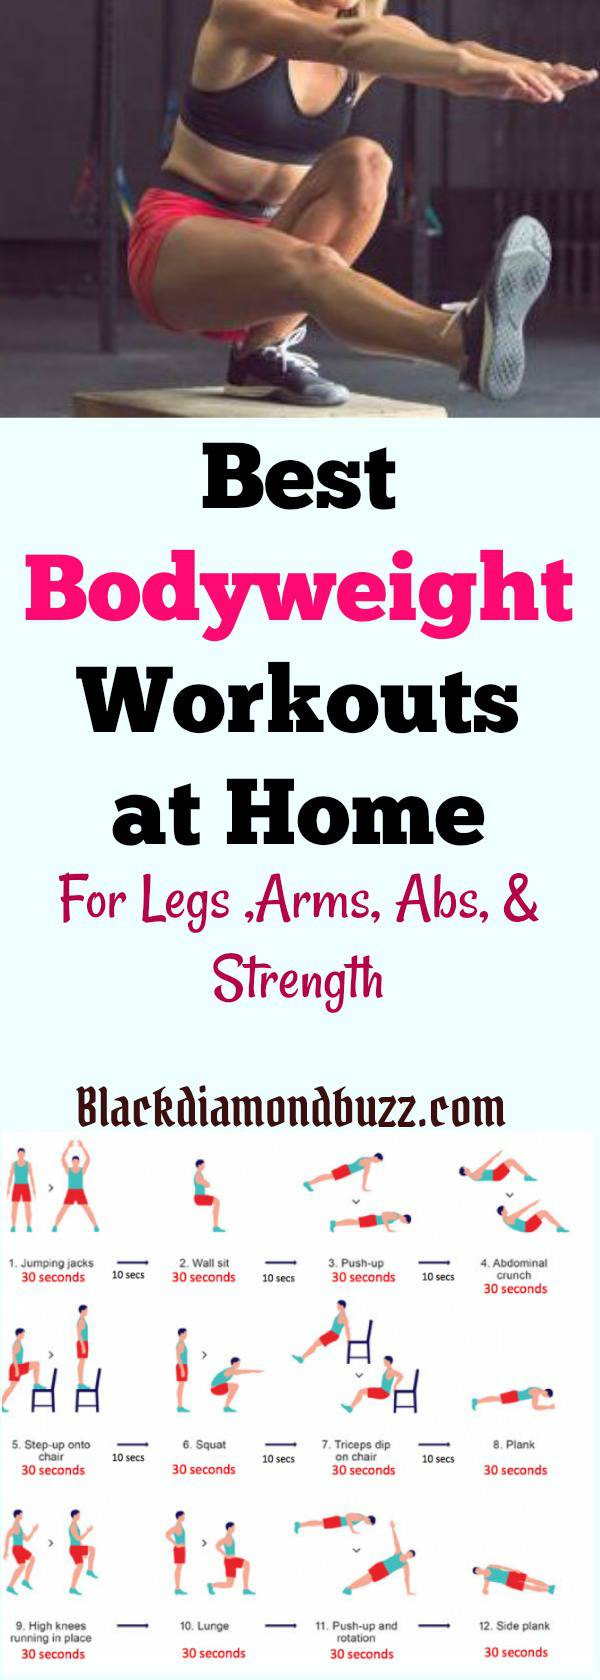 Weight Loss Exercises Weight Loss Exercises At Home For Women
 7 Best Bodyweight Exercises for Weight Loss at Home For